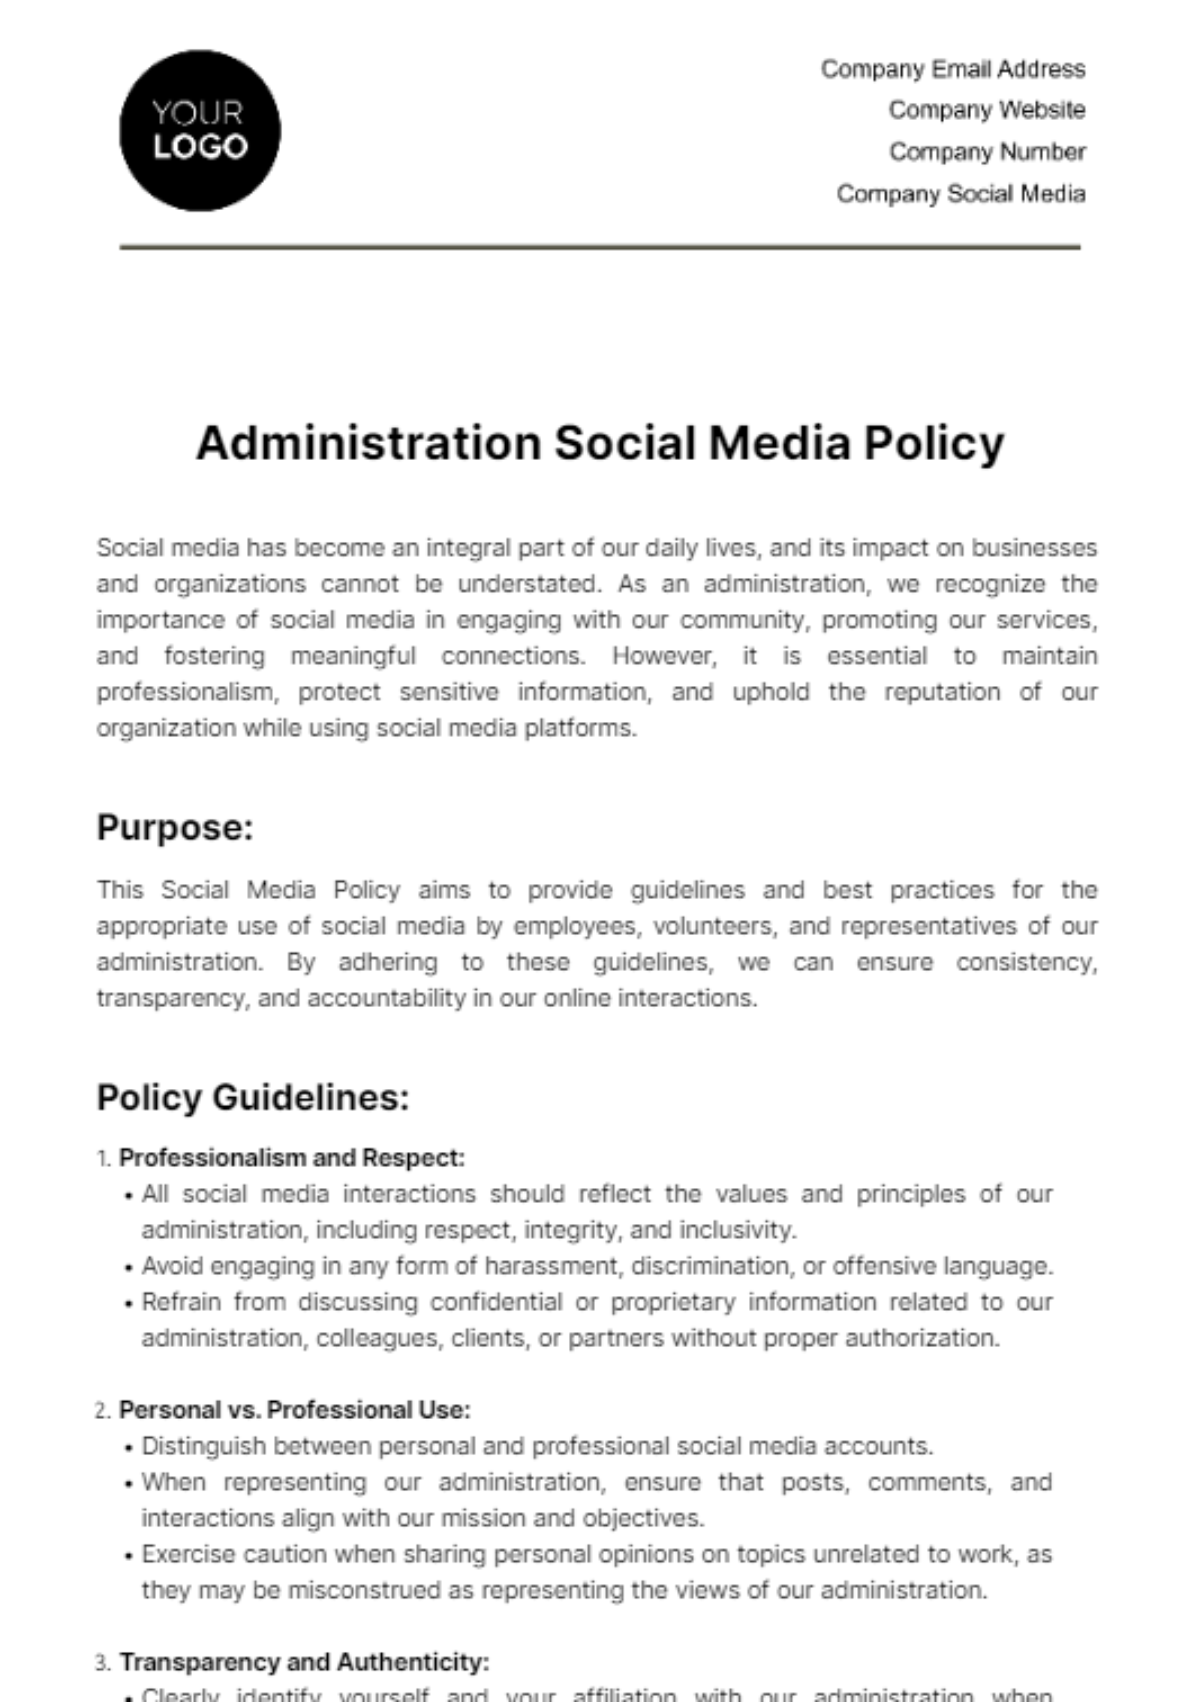 Administration Social Media Policy Template